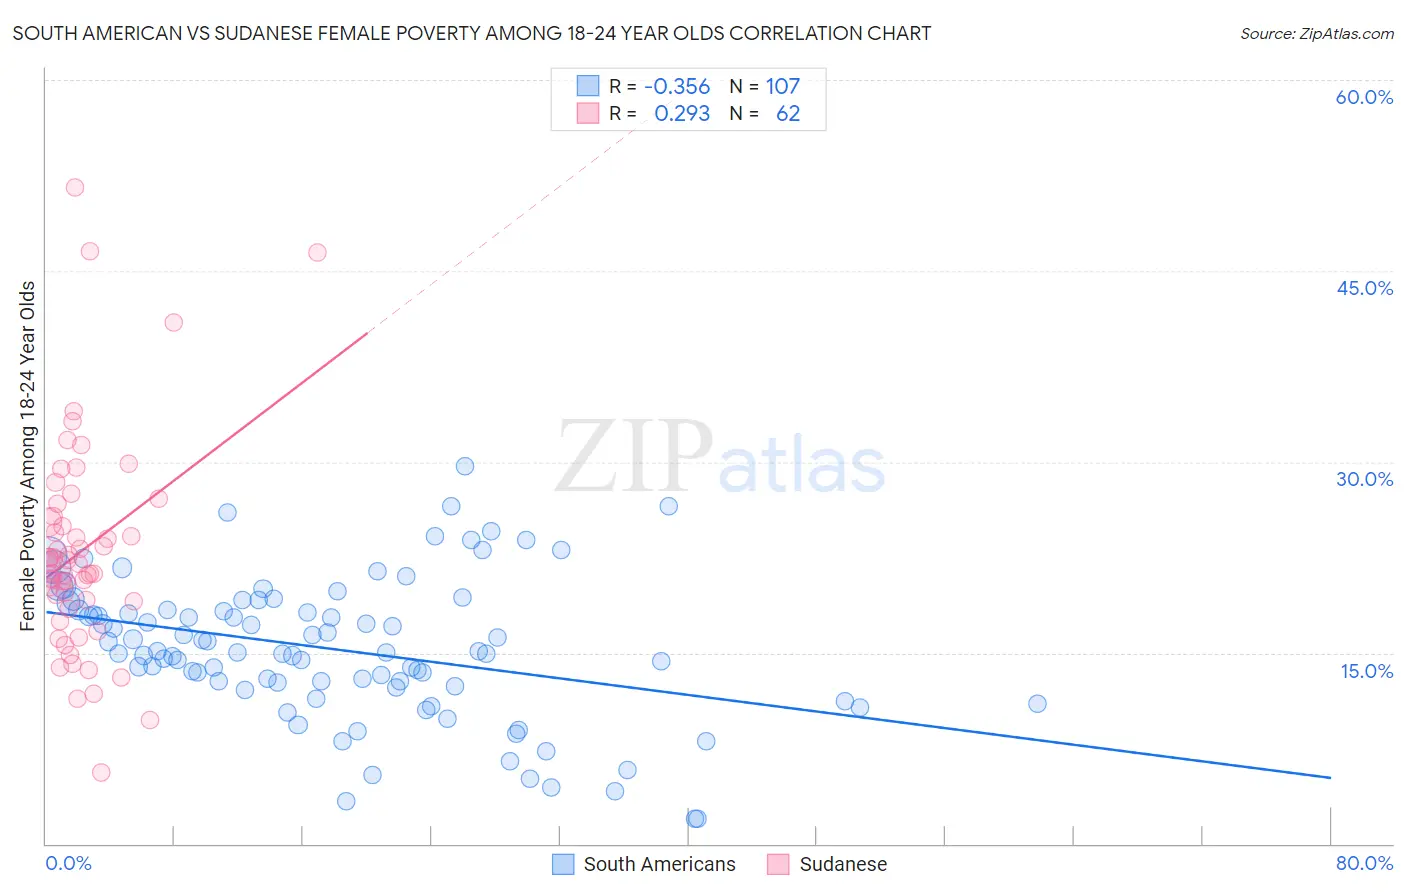 South American vs Sudanese Female Poverty Among 18-24 Year Olds